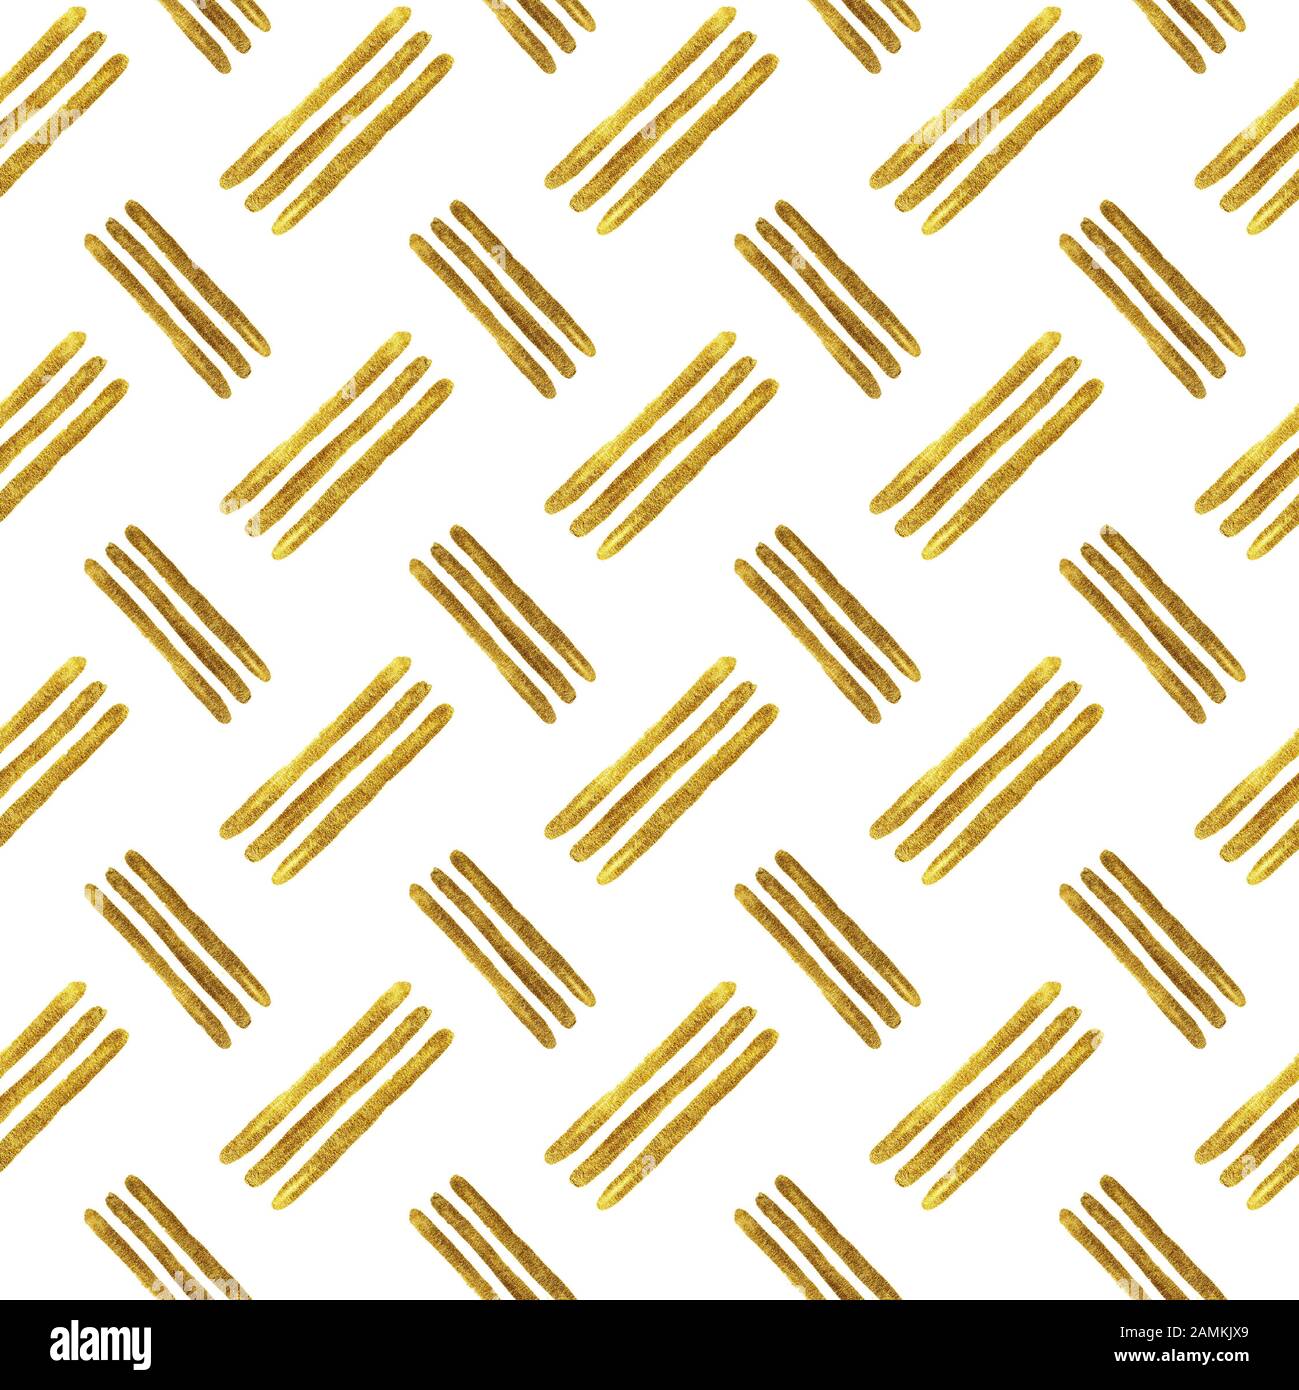 Gold line pattern, abstract golden stripe seamless background. Golden foil or shiny glitter paint texture, three diagonal stroke lines pattern, luxury premium background design Stock Photo